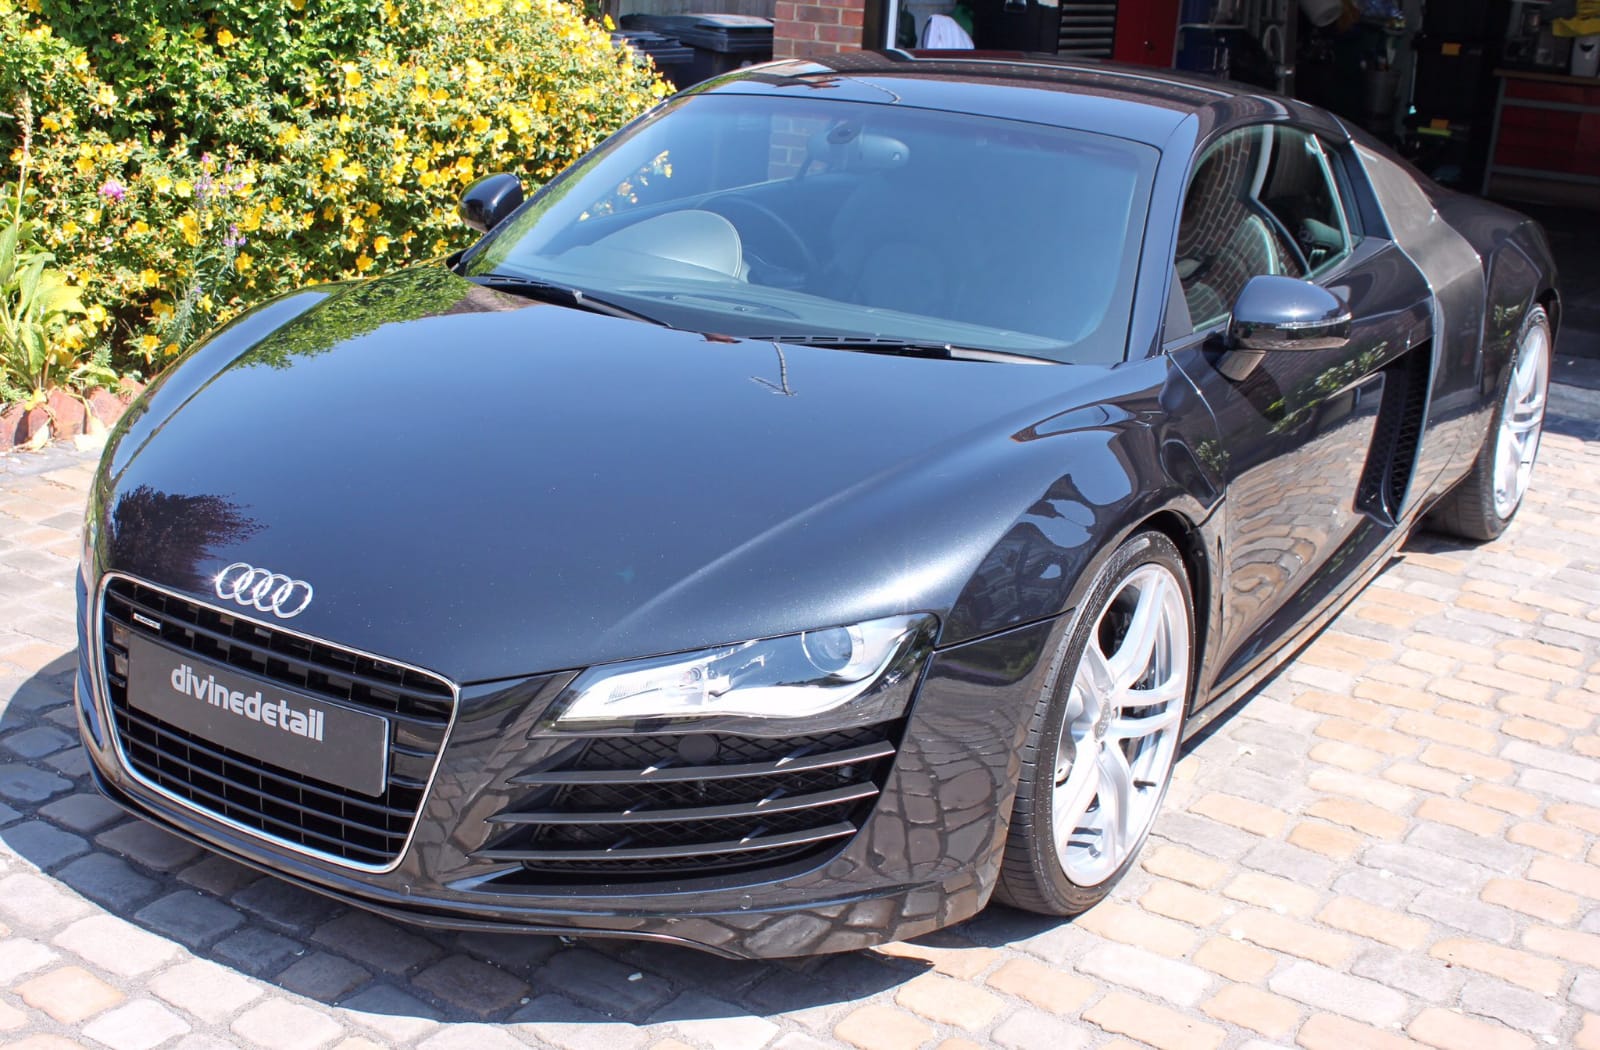 2008 Audi R8 4.2 V8 - Page 2 - Readers' Cars - PistonHeads